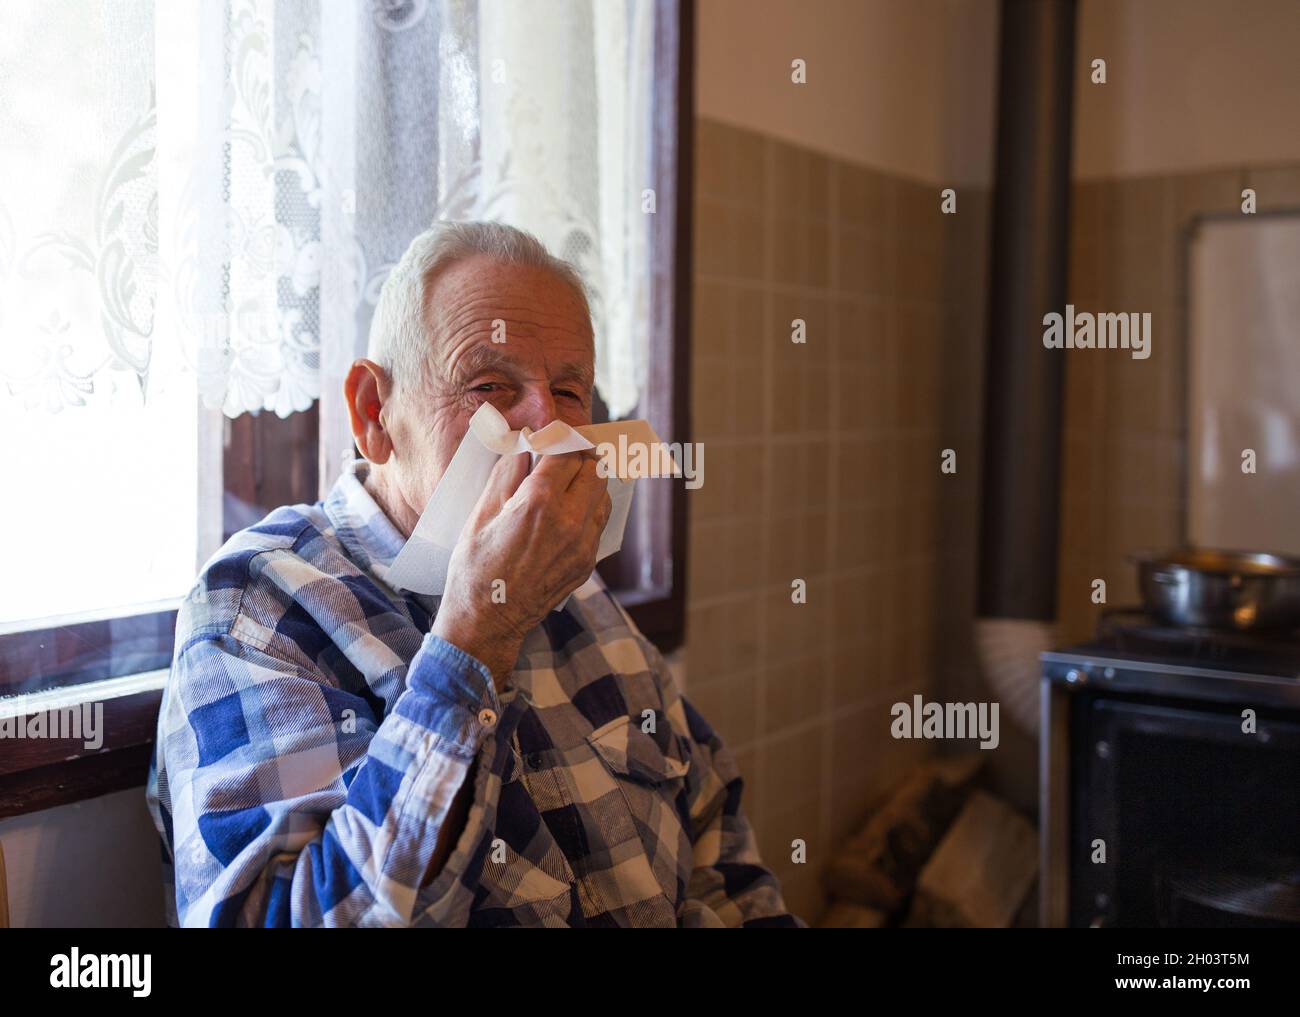 Old man holding tissue and blowing nose. Virus and grippe concept Stock Photo